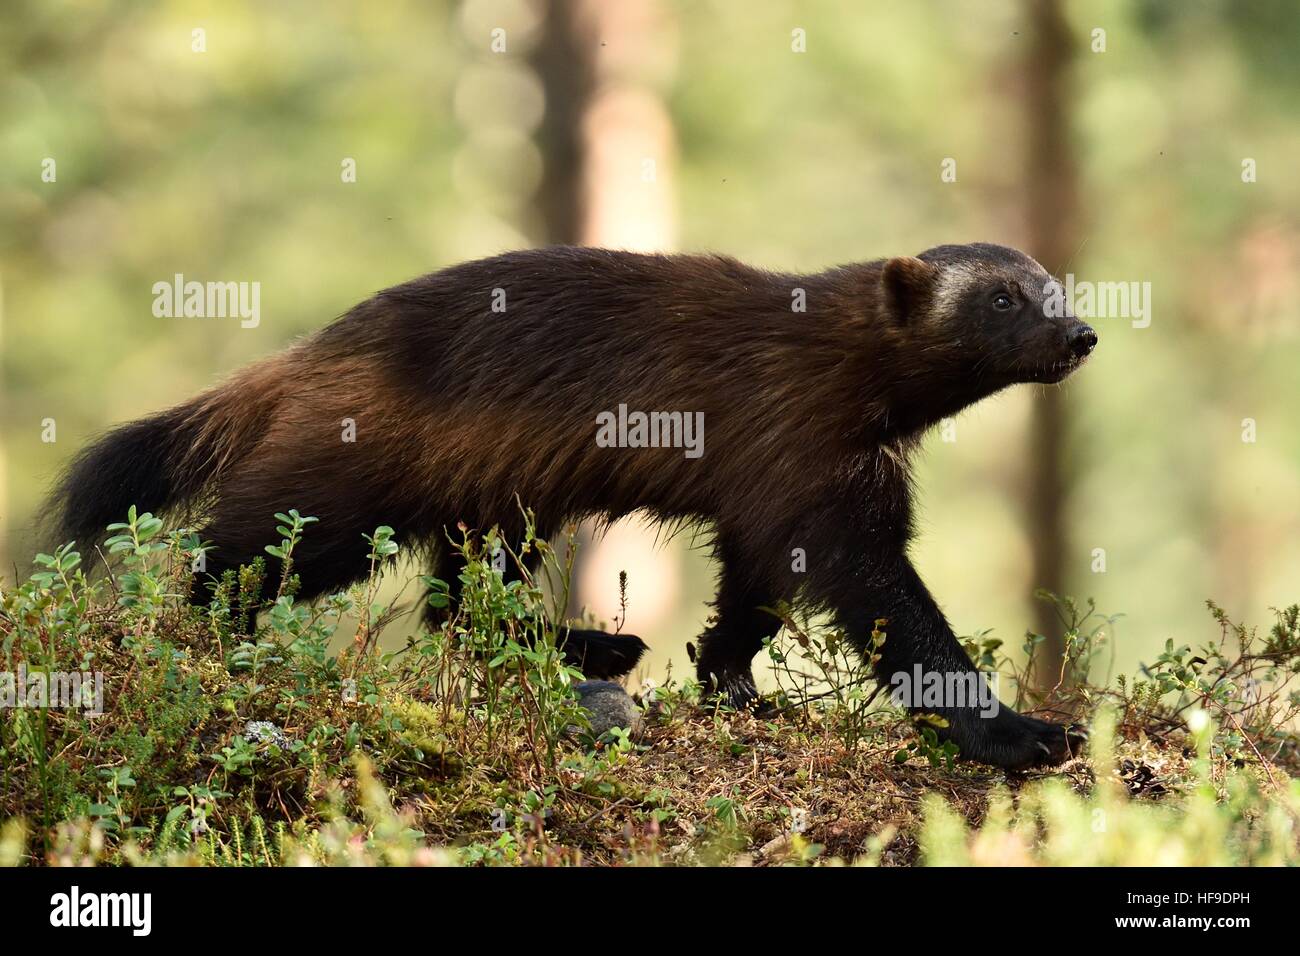 Wolverine in forest Stock Photo